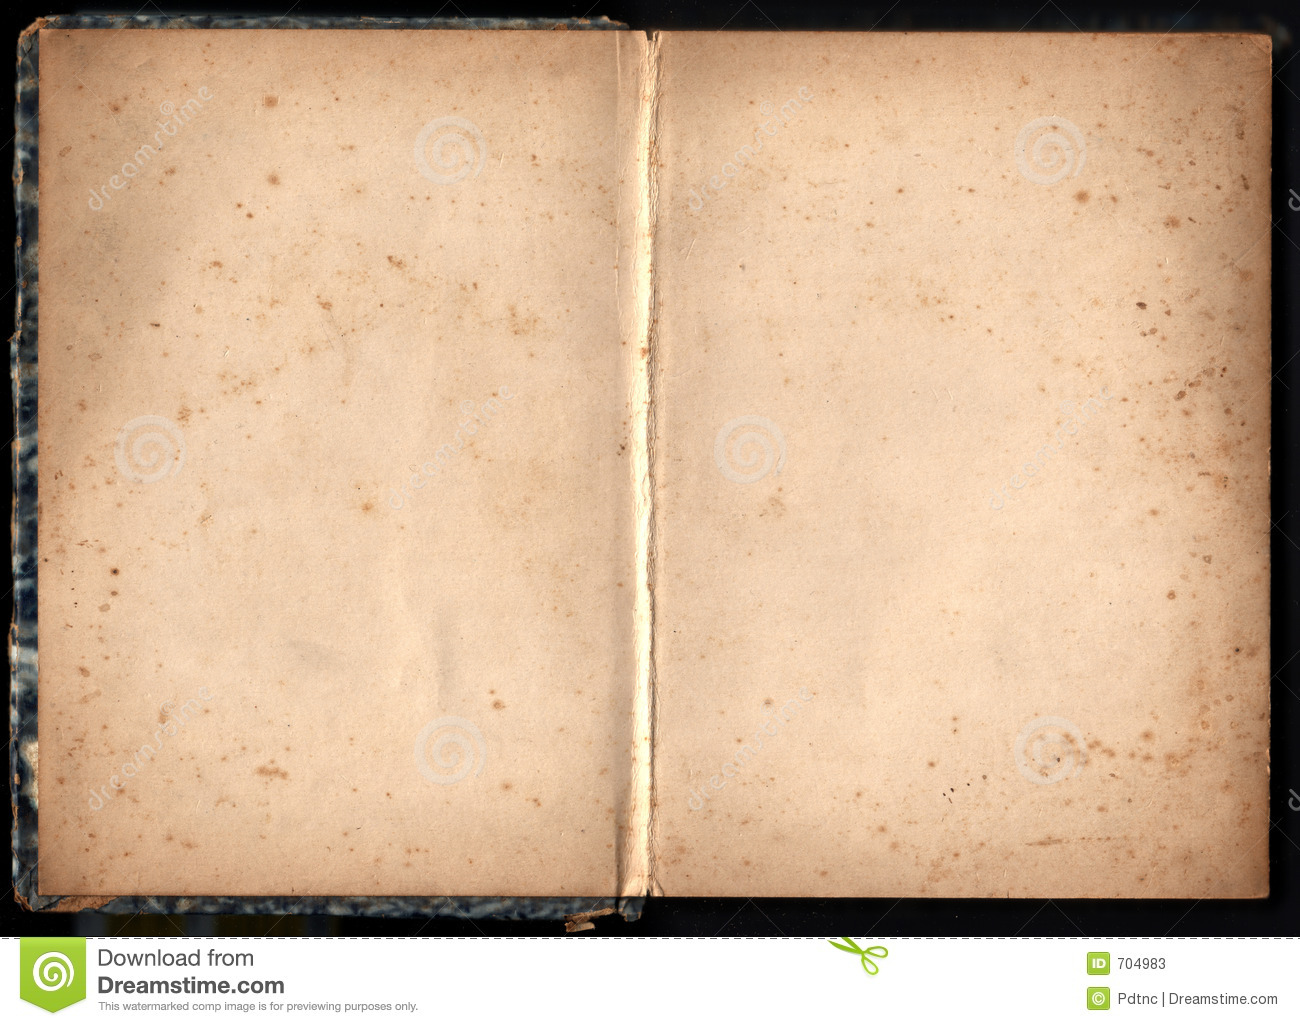 Old Book With Worn Pages Stock Photos   Image  704983